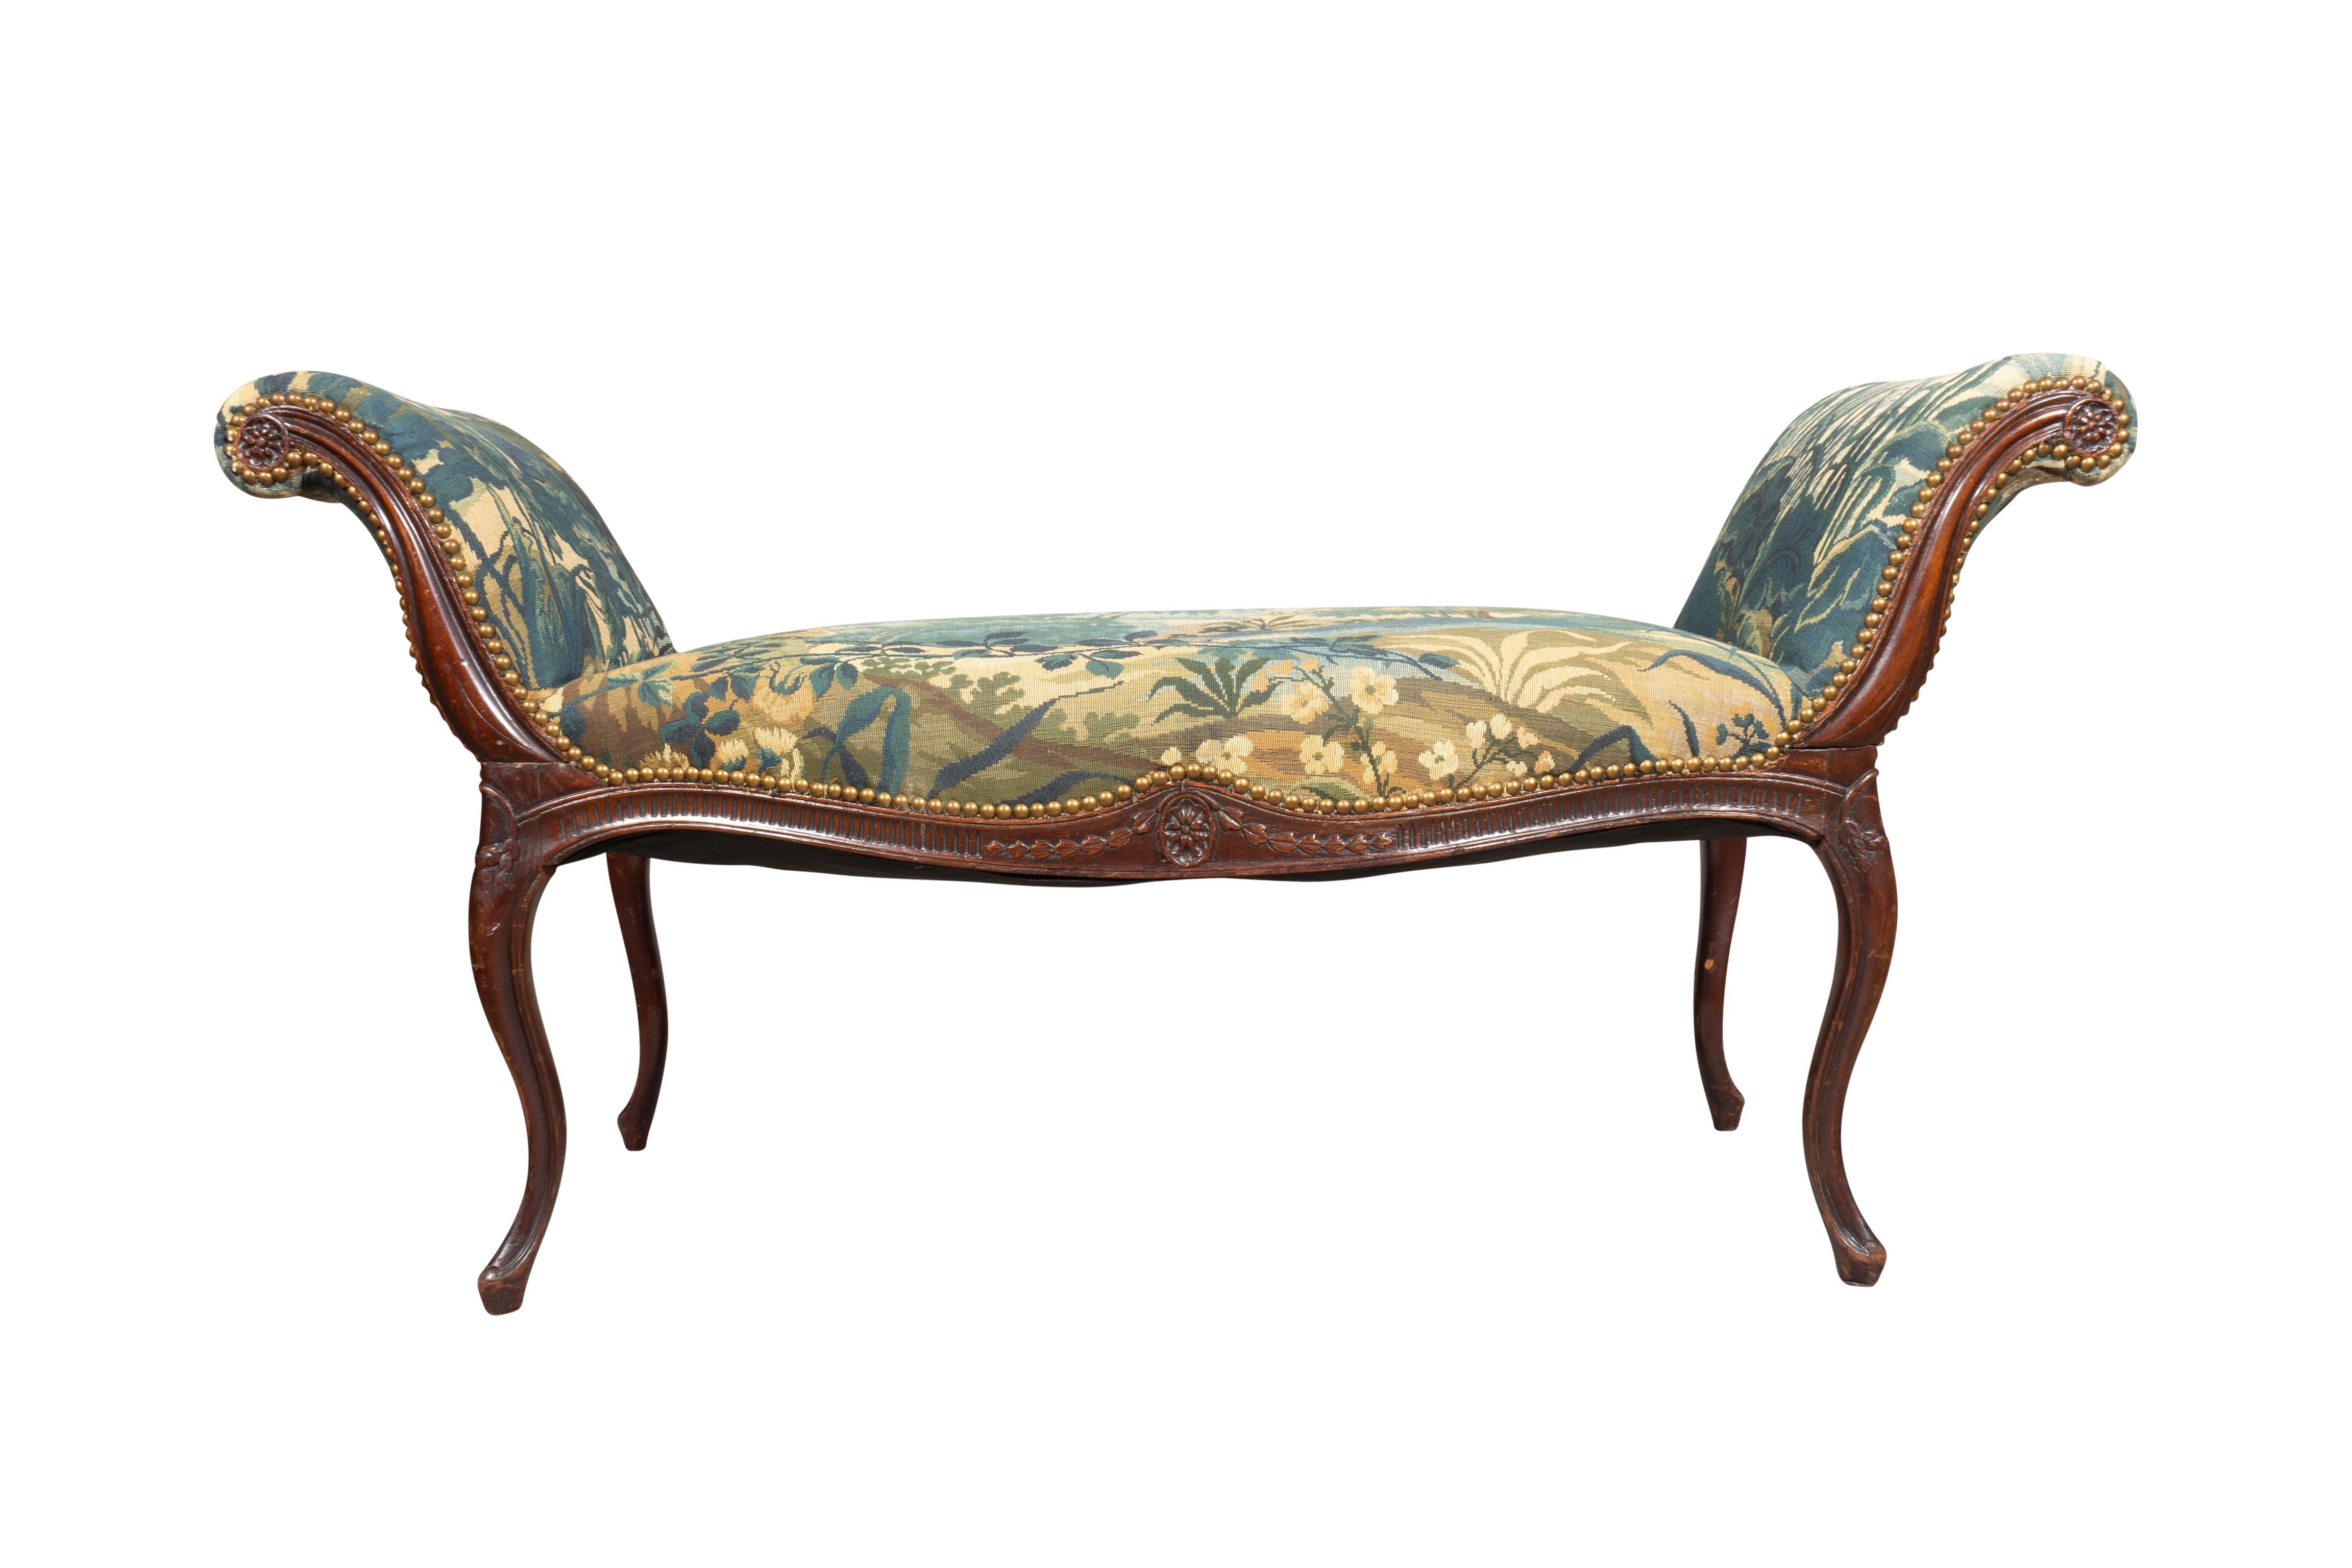 In the French taste. With bowed seat upholstered in verdure upholstery with tacks and scrolled ends. The frame carved with central paterae and trailing bell flowers. Paterae at the arm terminals Raised on molded cabriole legs.